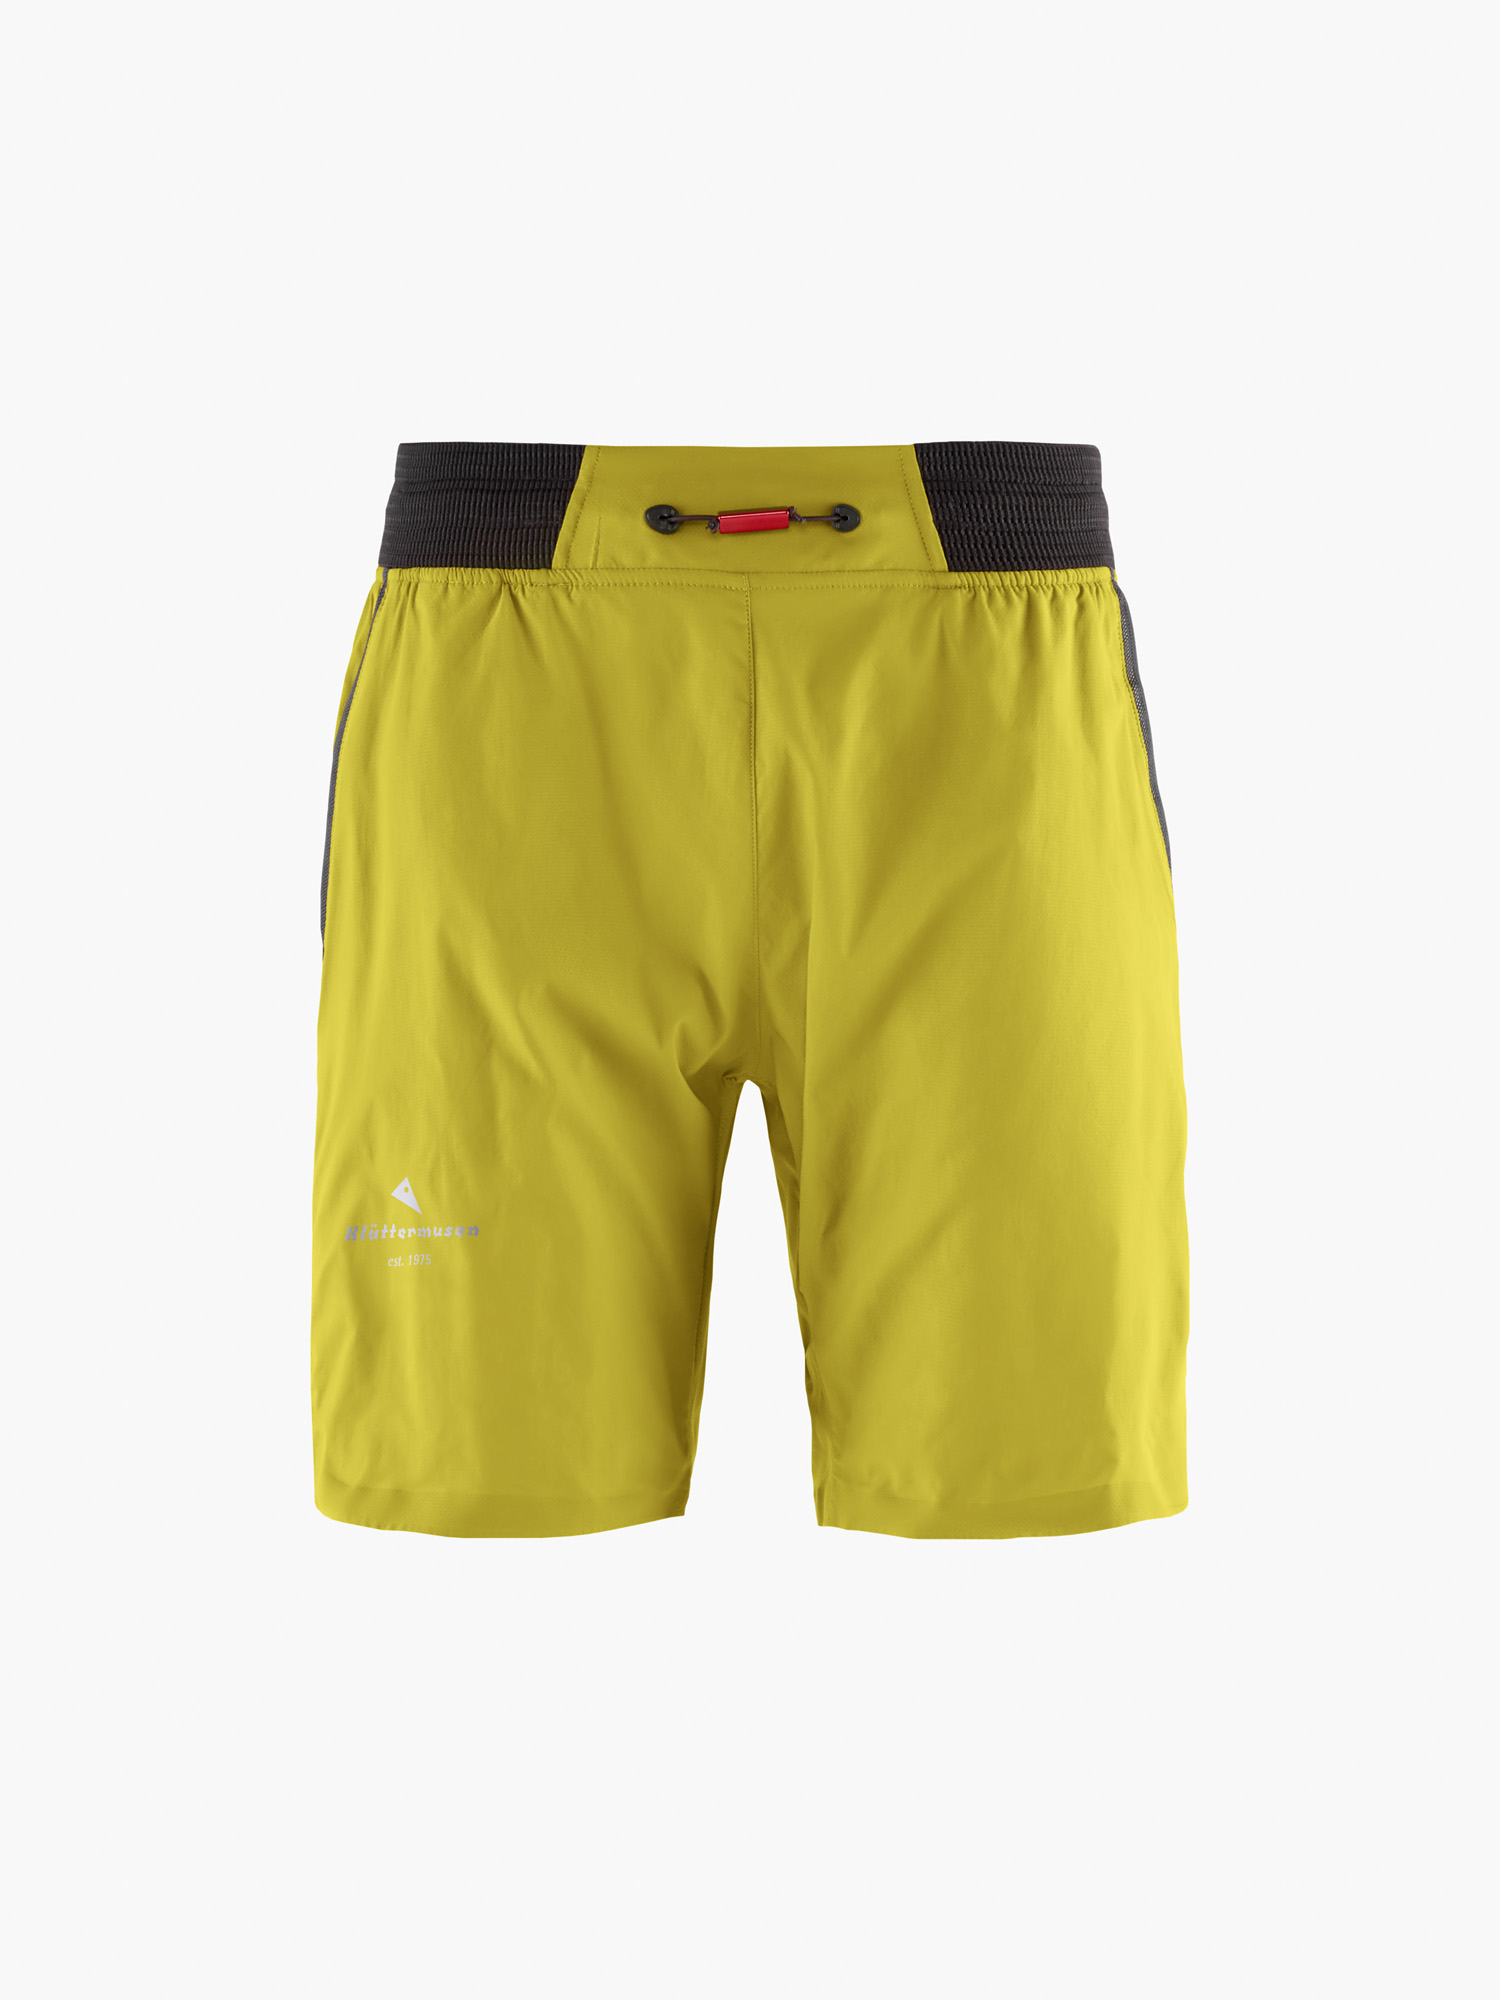 10113 - 74 Levitend Active Shorts M's - Pine Sprout